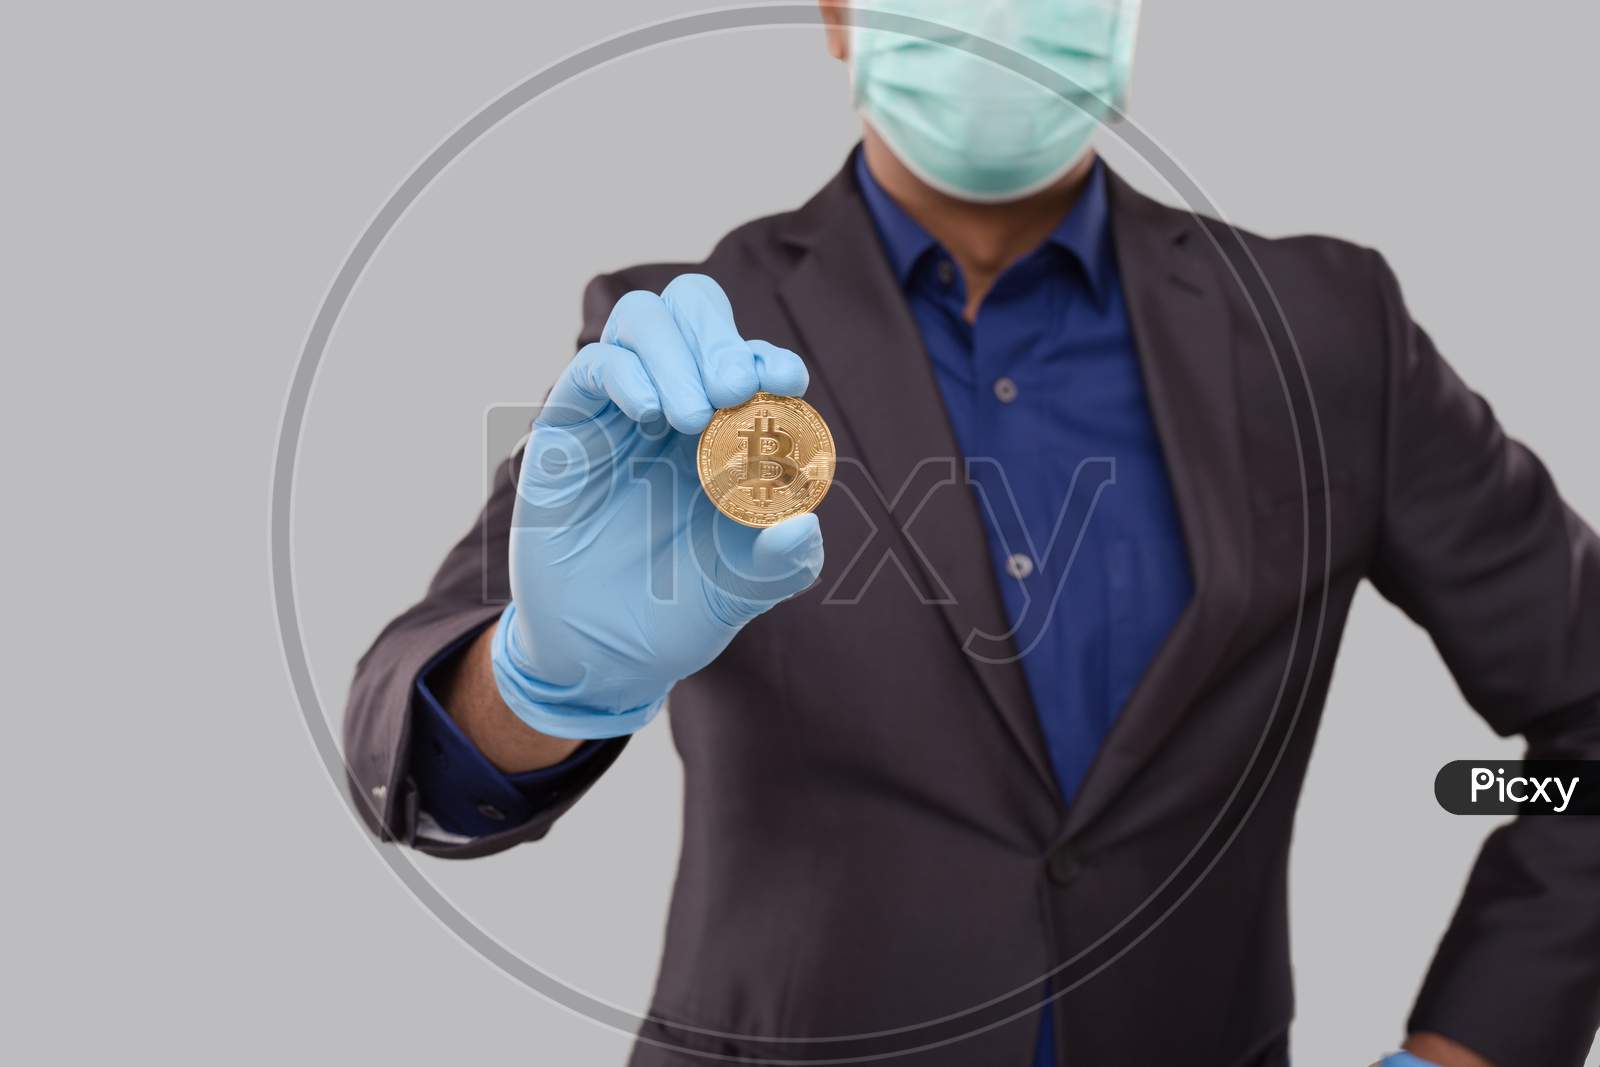 Businessman Showing Bitcoin Wearing Medical Mask And Gloves. Business Man Cypto Currency.